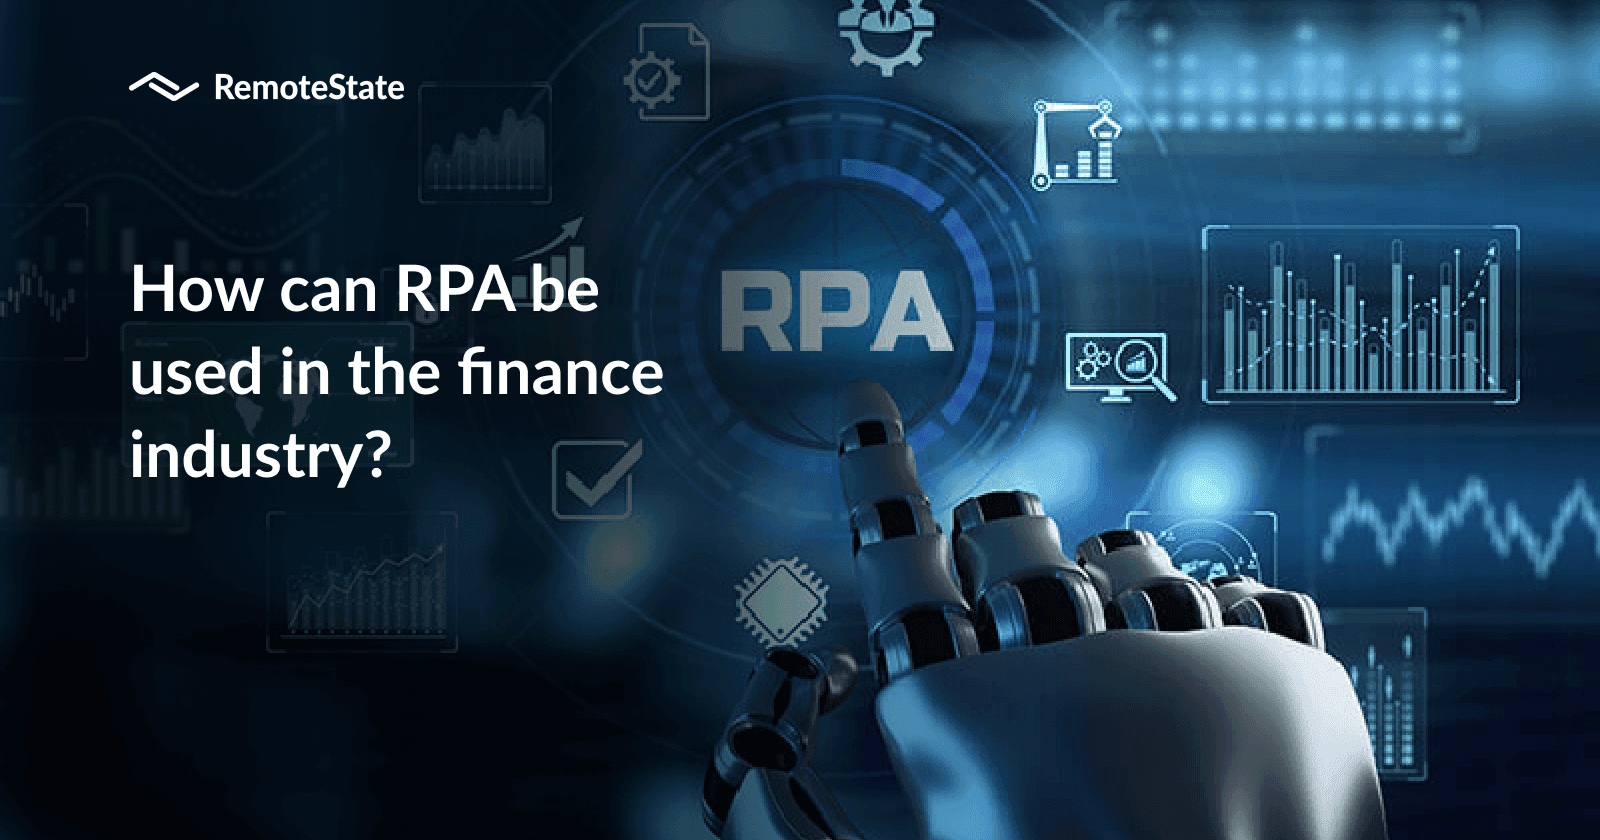 How can RPA be used in the finance industry?